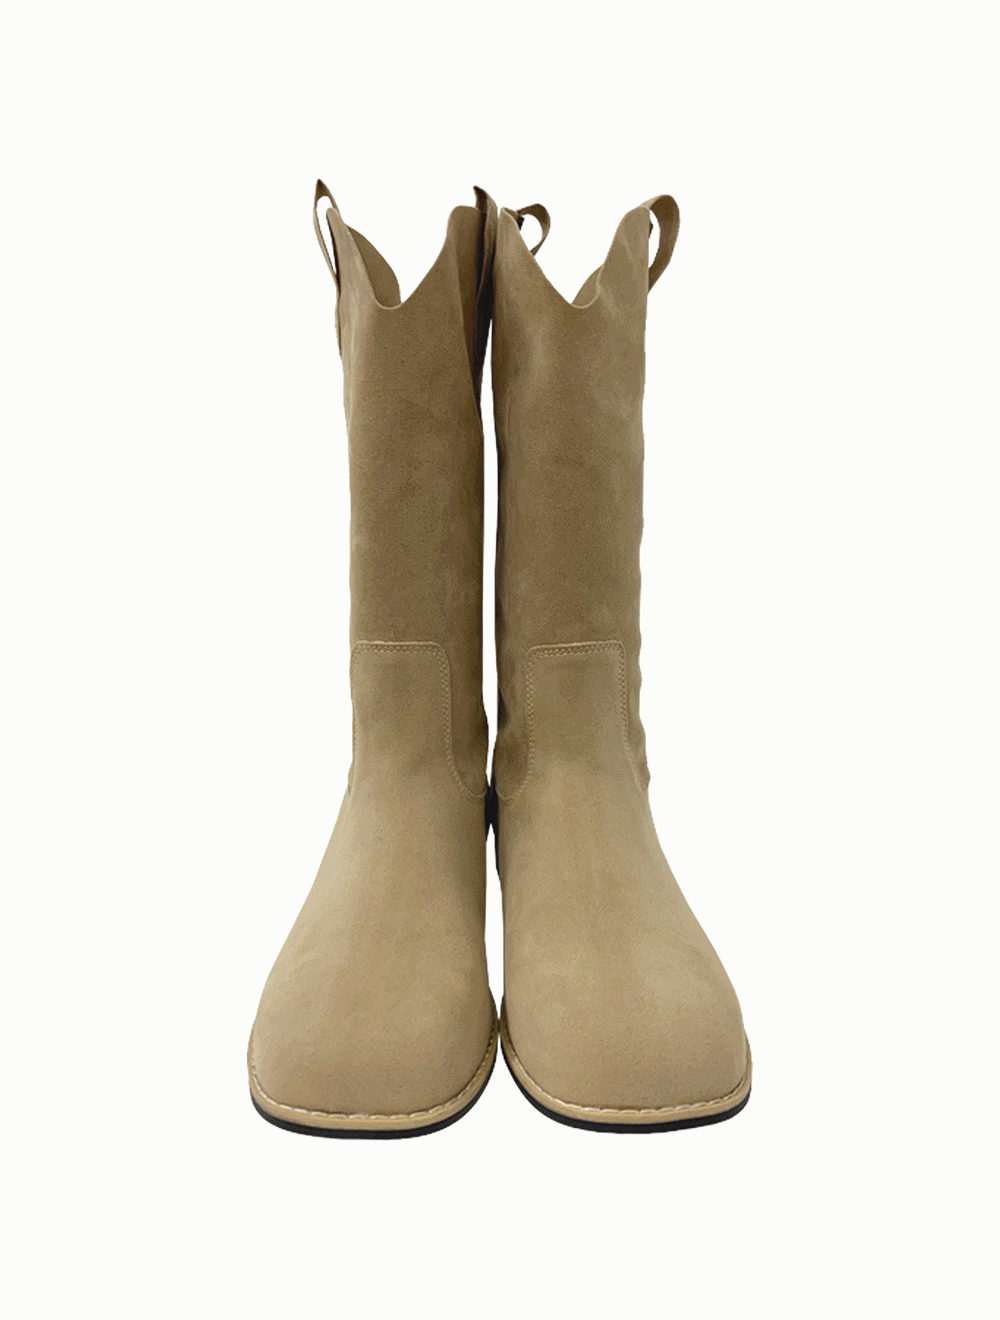 topy suede - boots